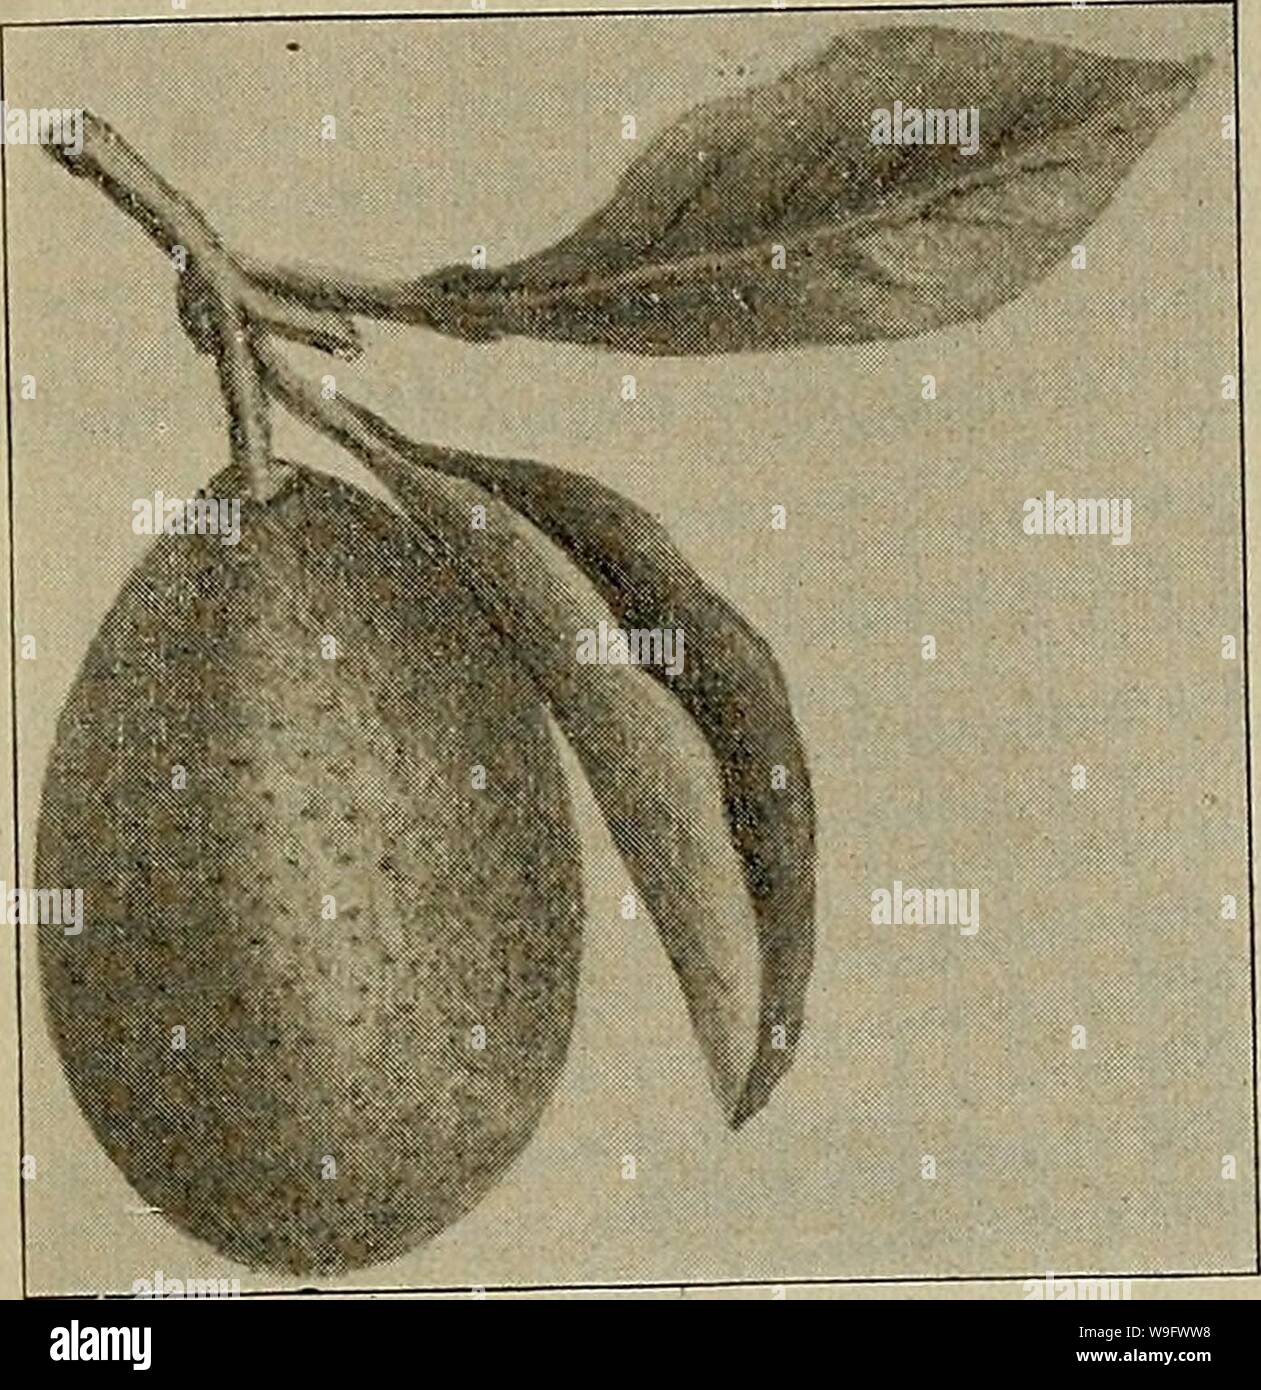 Archive image from page 76 of Culture of the citrus in. Culture of the citrus in California  cultureofcitrusi00cali Year: 1900 ( THE. ORANGE IN CALIFORNIA—VARIETIES. 69    Olive-Shaped Kumquat—natural size. Kumquat Type. Citrus aurantium, var. Japon- ica, Thunberg. Olive-Shaped.—Fruit very small,olive-shaped,rind thick, yellow, smooth, sweet scented, very little pulp, contains many seeds. Tree dwarf (a bush), four to six feet; a very prolific bearer. The fruit is edible whole; the rind has a pleas- ant aroma. Valuable for pre- serves and marmalades. Stock Photo